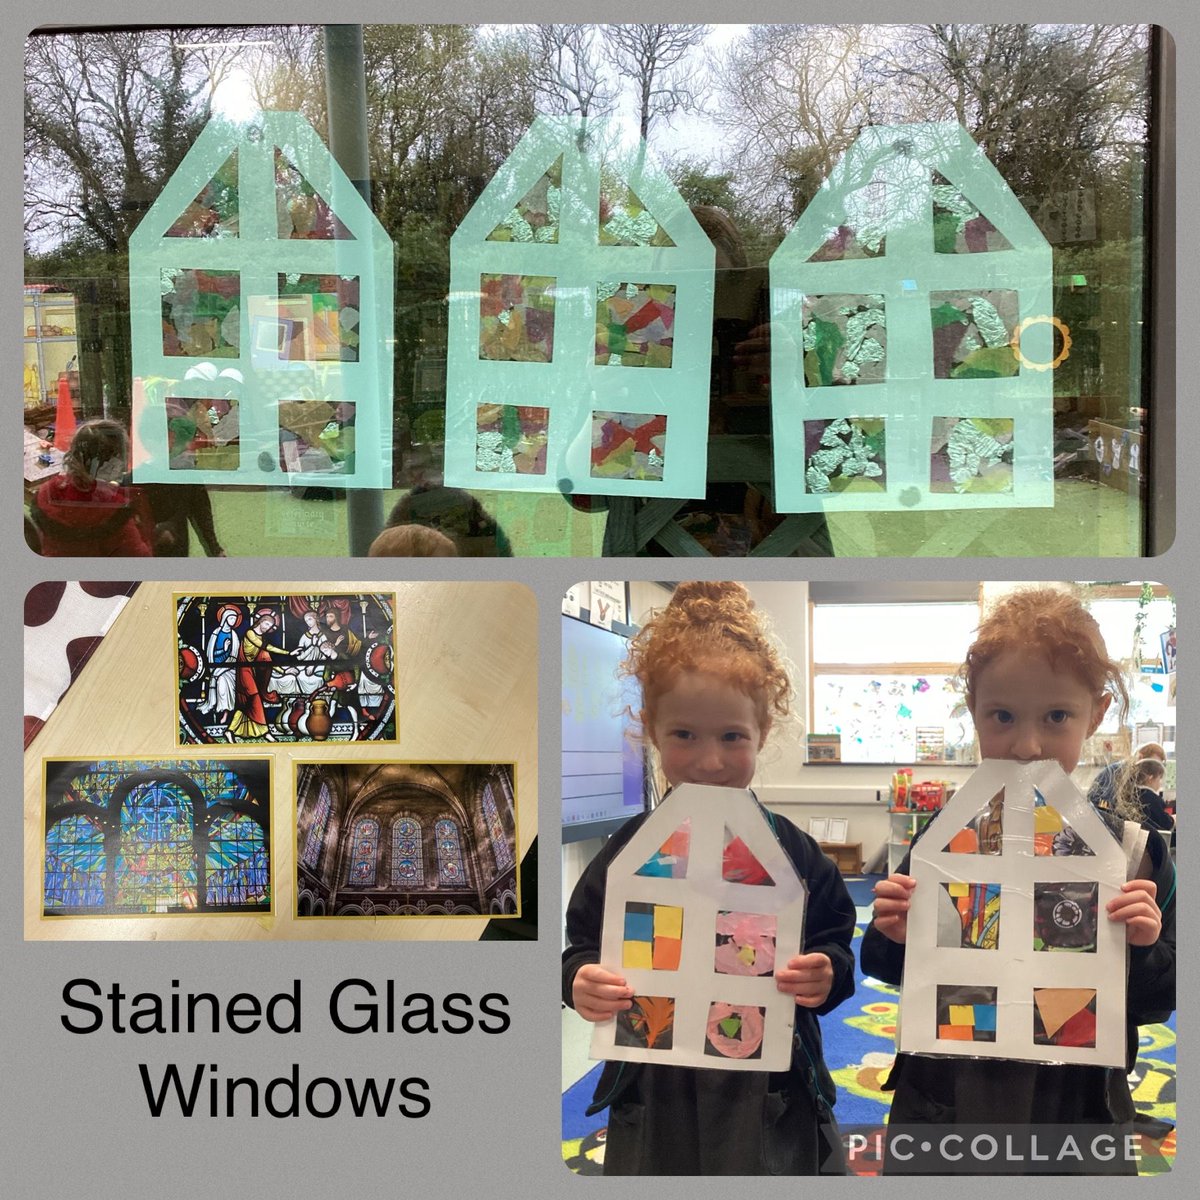 In Reception this term we are learning about special places and how churches are important to Christians. We have explored features of churches and used our collage skills to create stained glass windows. #ourcurriculumignites #letyourlightshine